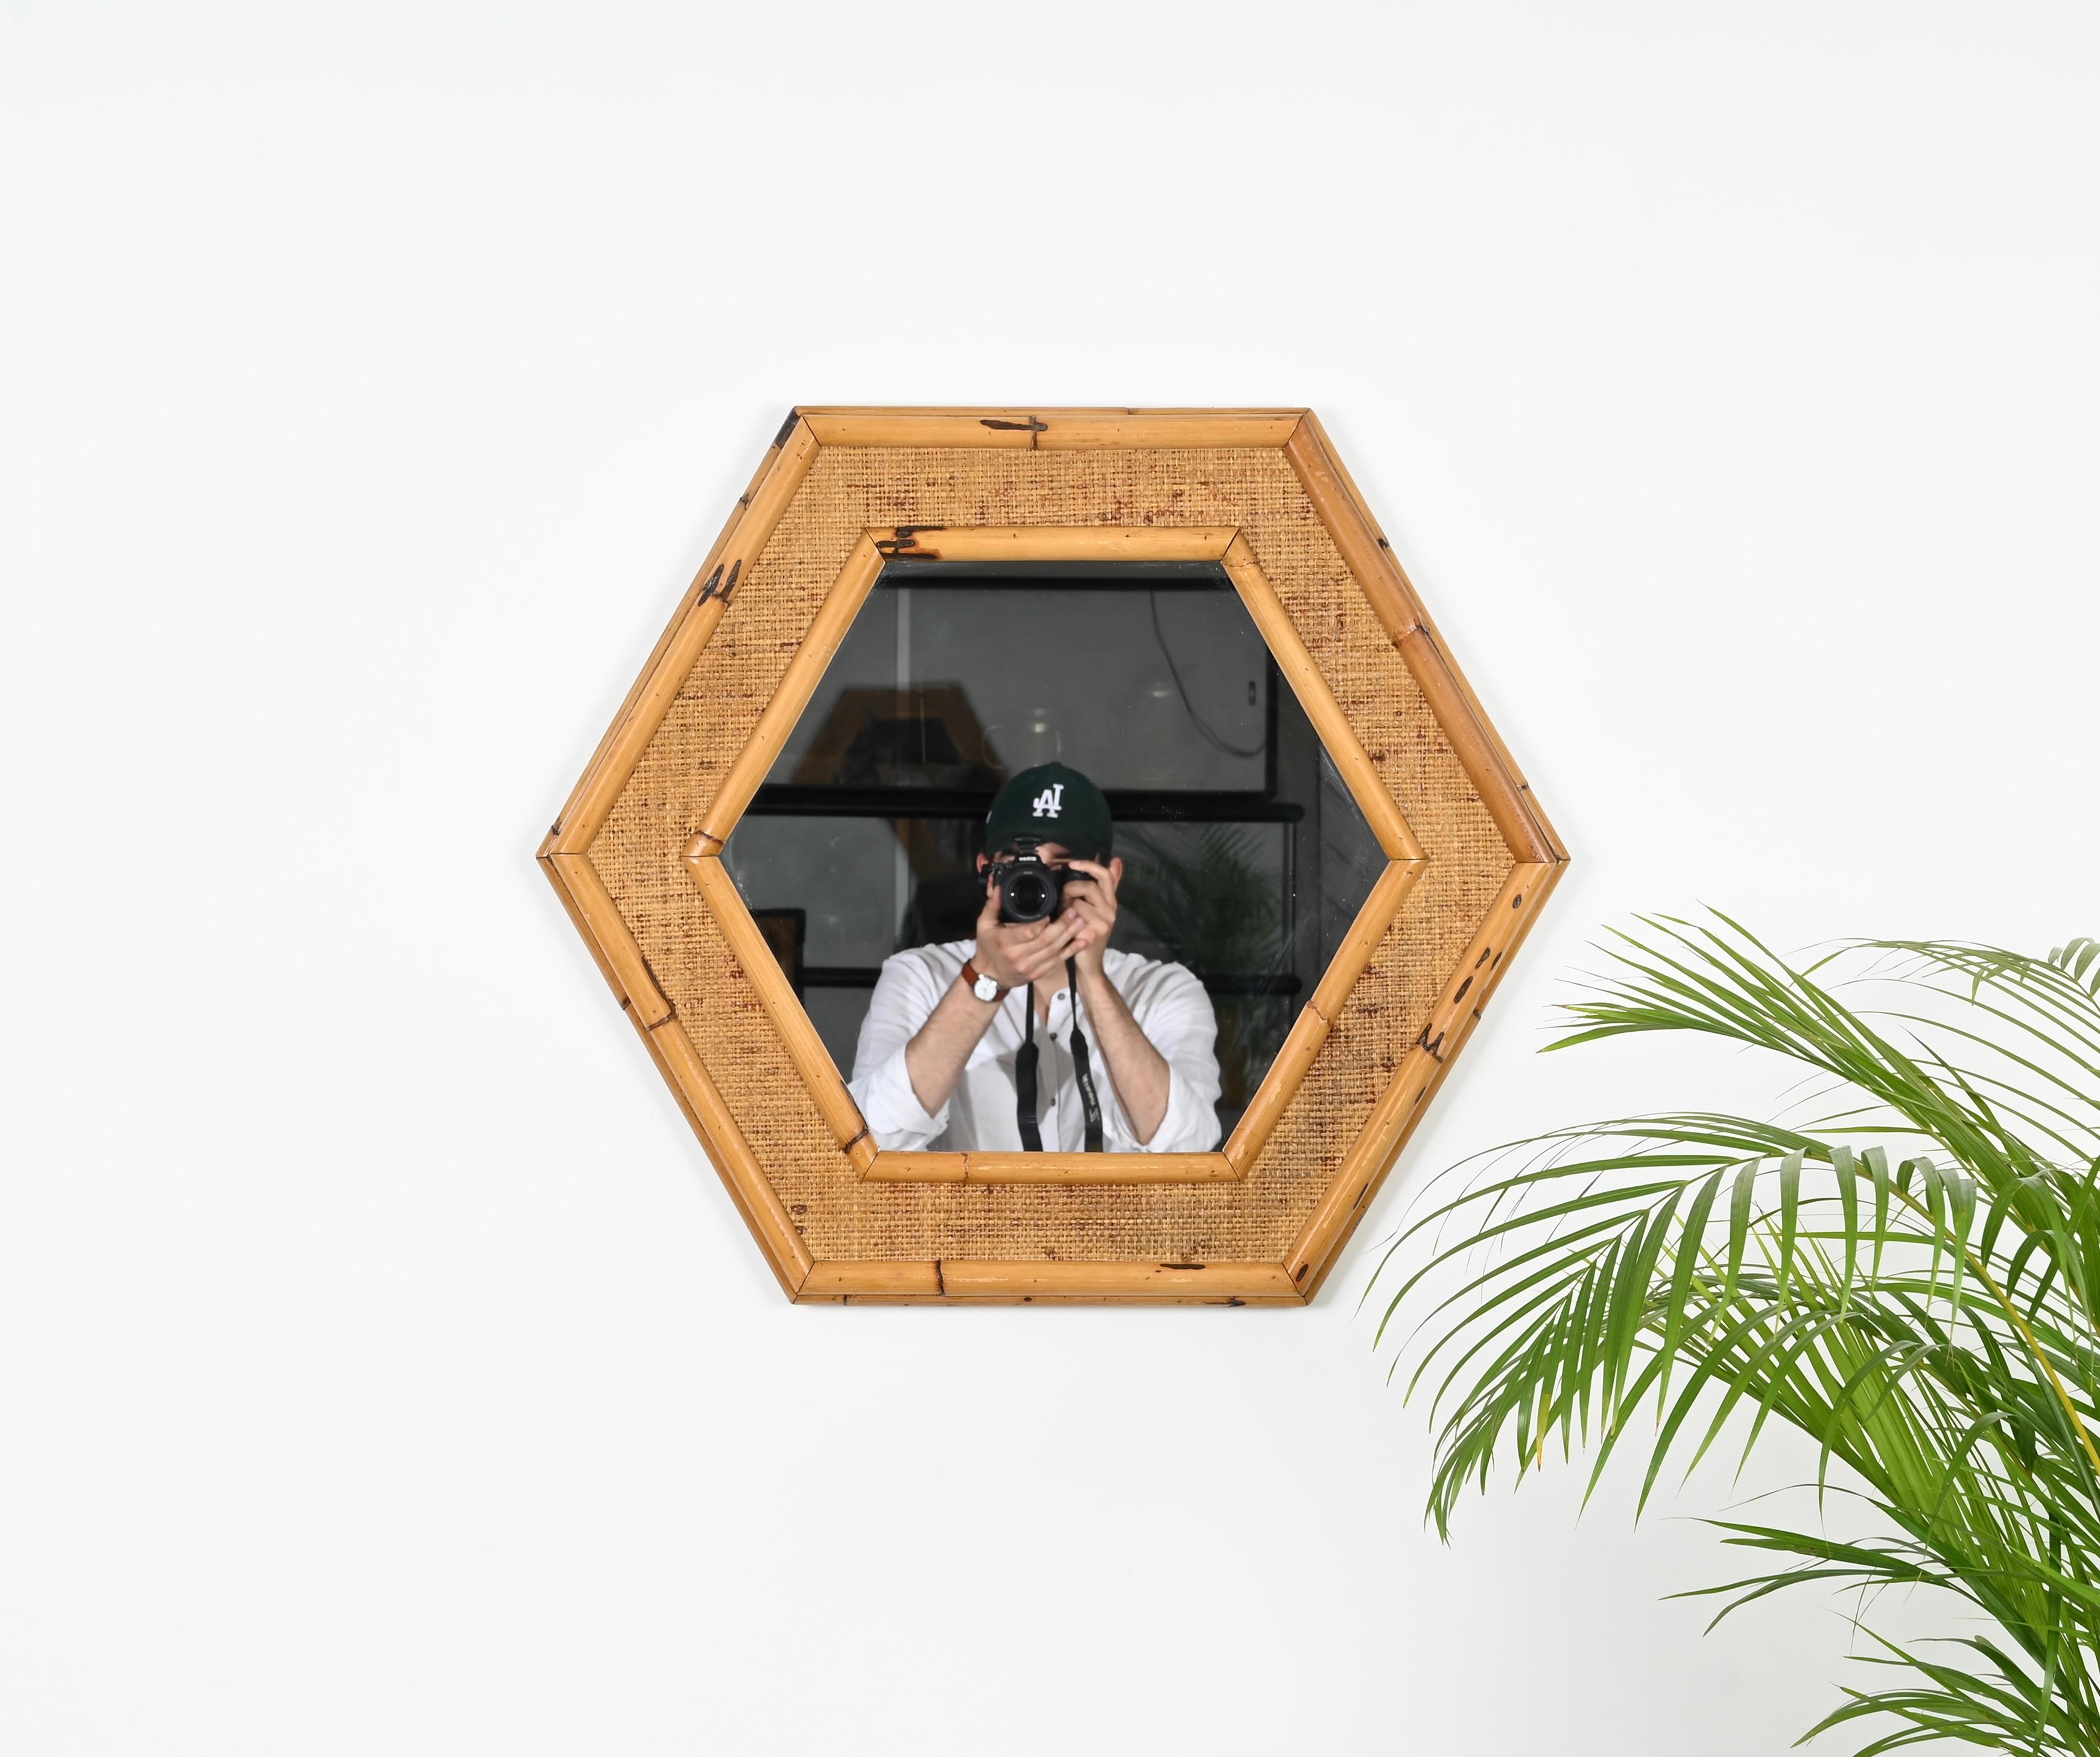 Stunning Mid-Century French Riviera style hexagonal mirror in bamboo and woven rattan. This unique and charming mirror was made in Italy during the 1970s. 

This lovely organic mirror has an hexagonal double frame made in bamboo which is enriched